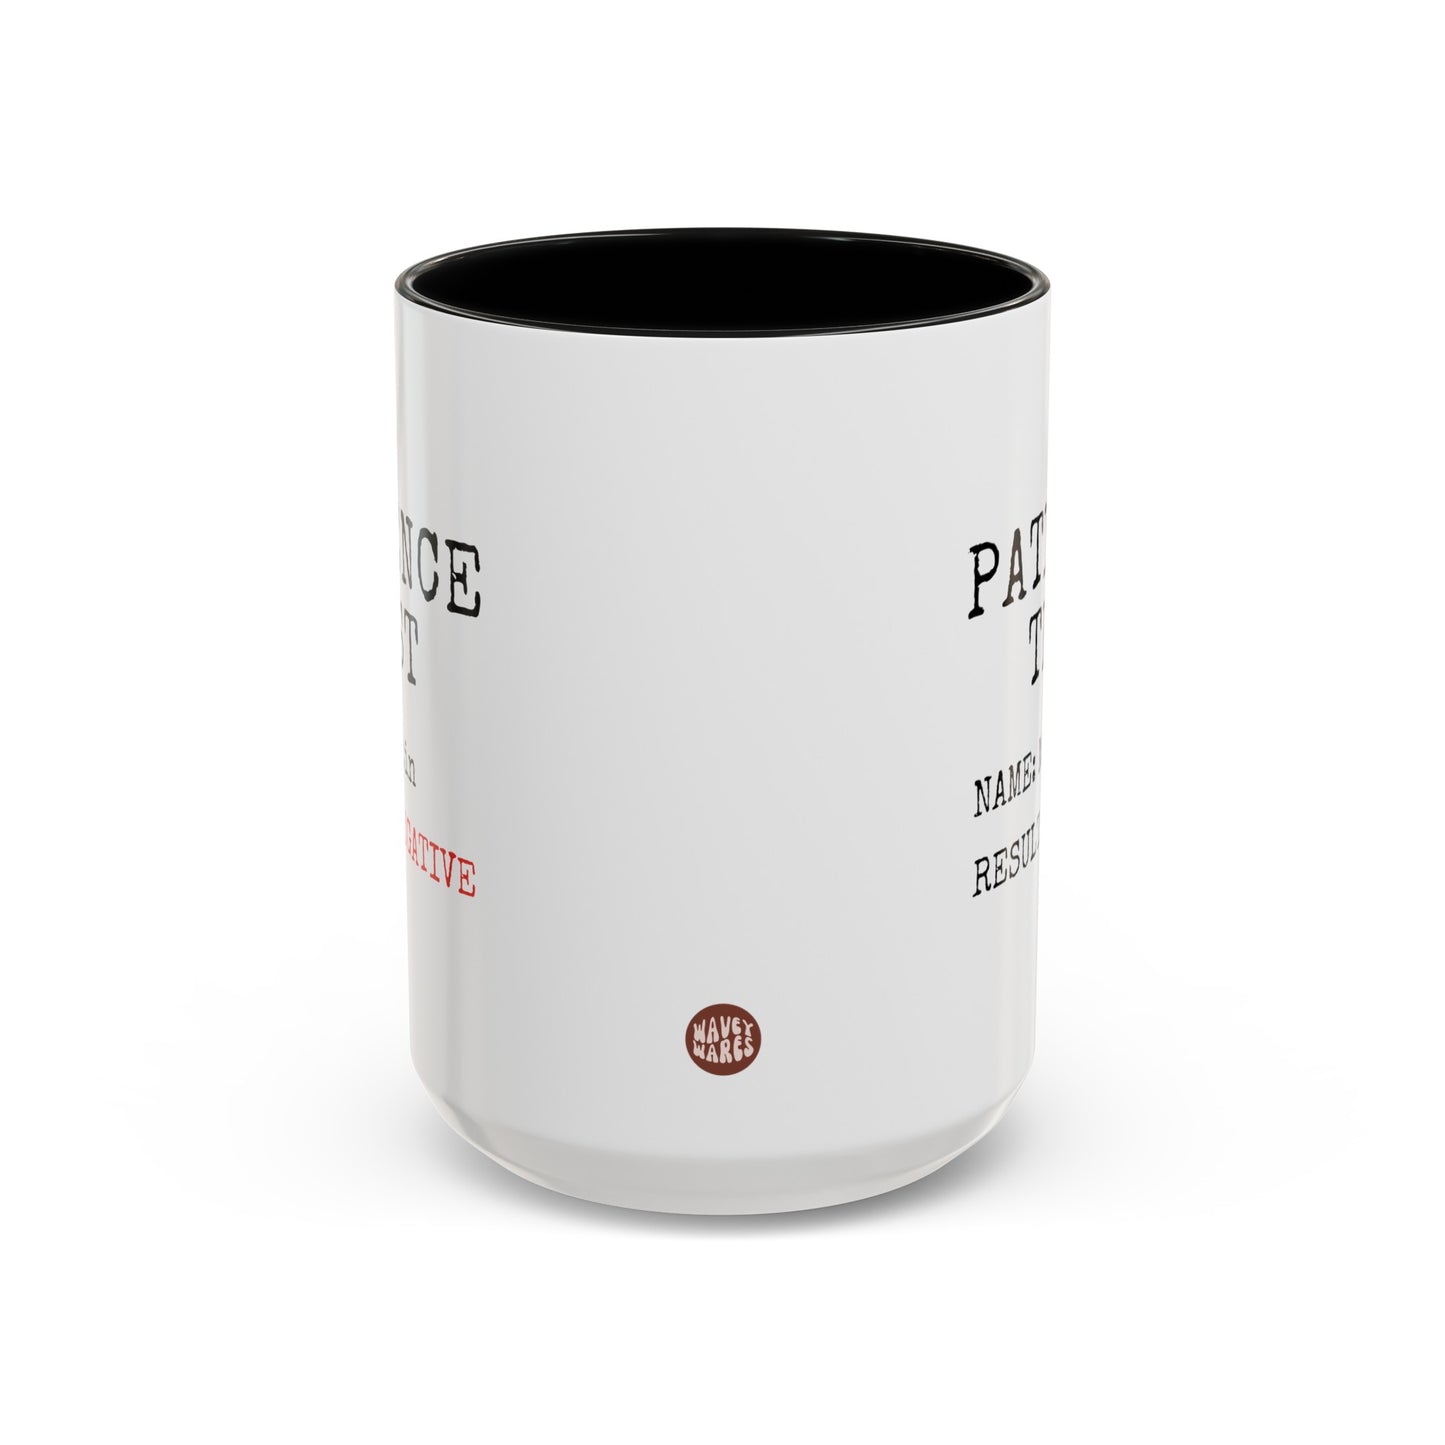 Personalized Patience Test 15oz white with black accent funny large coffee mug gift for coworker custom customize name boss manager colleague friend sarcastic sarcasm result waveywares wavey wares wavywares wavy wares side